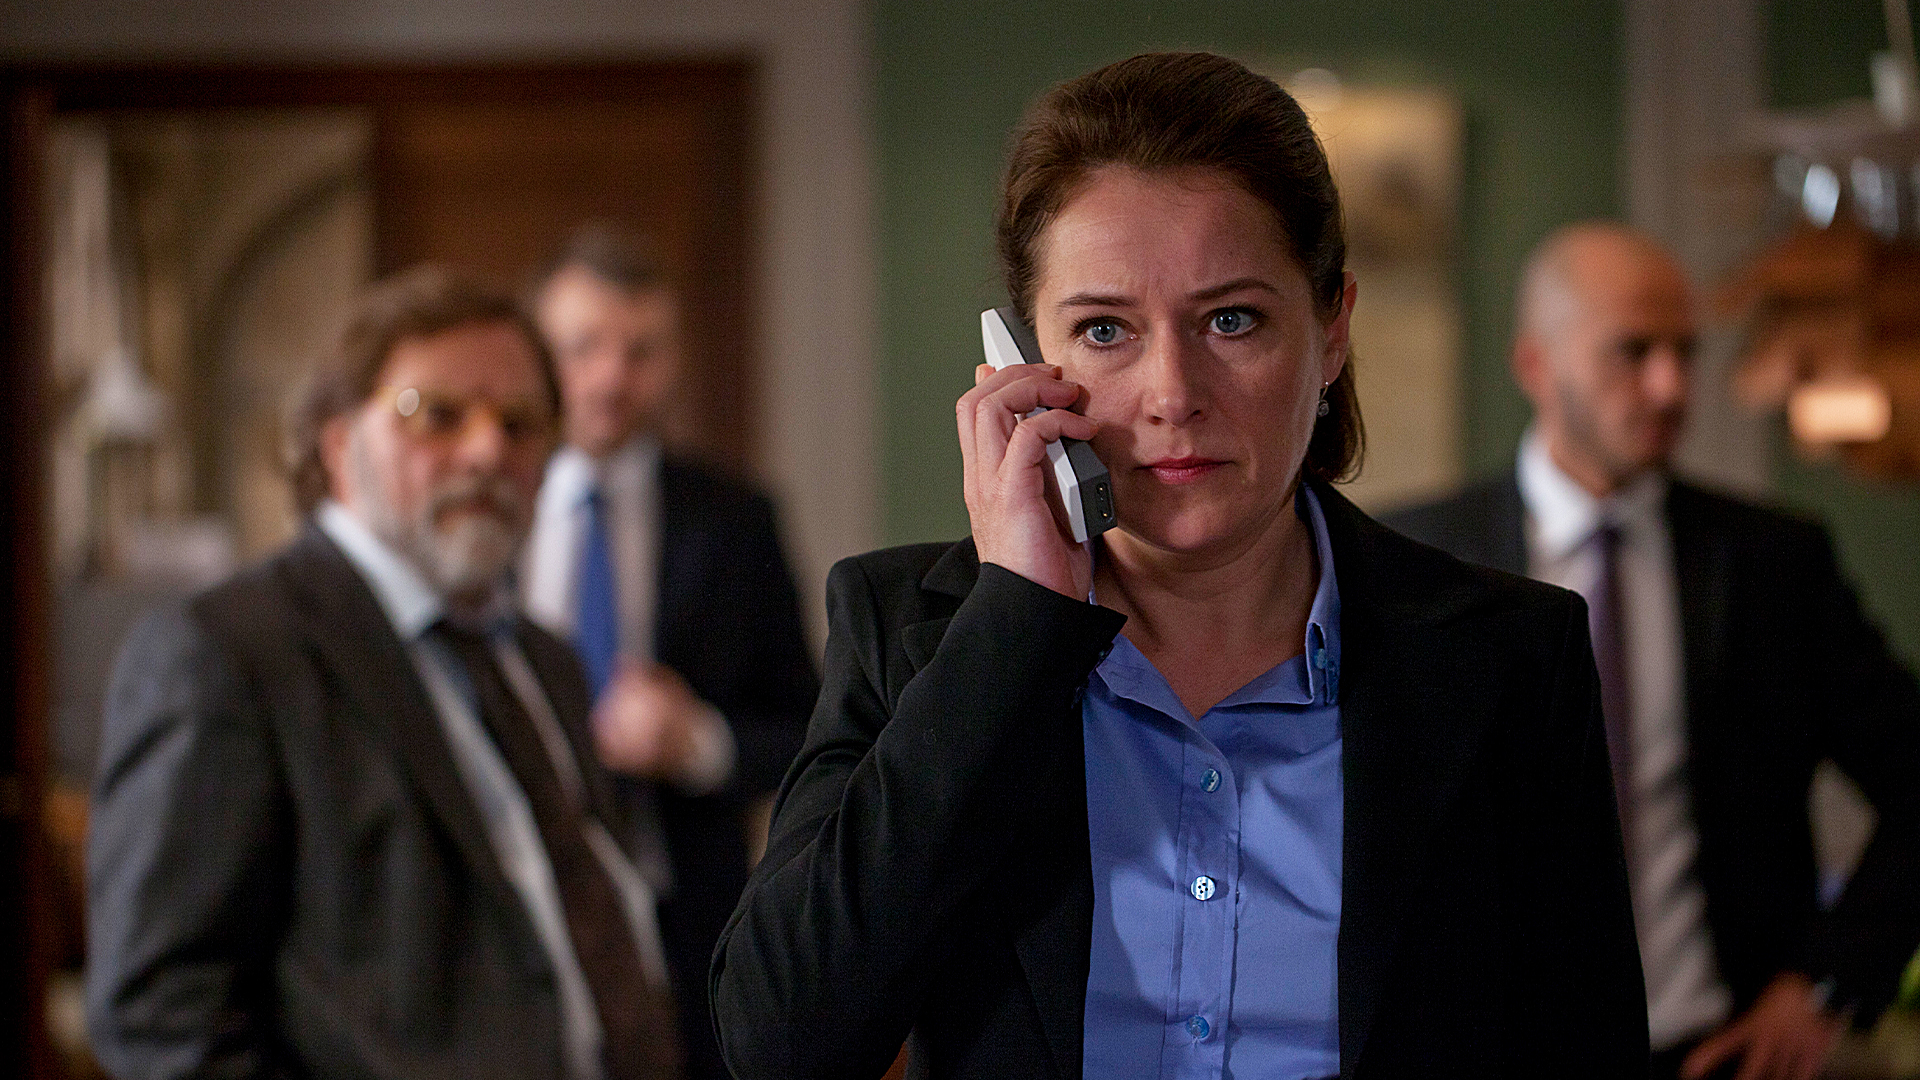 Borgen - S2E18 - What is Lost Inwardly, Must Be Won Outwardly Pt 2